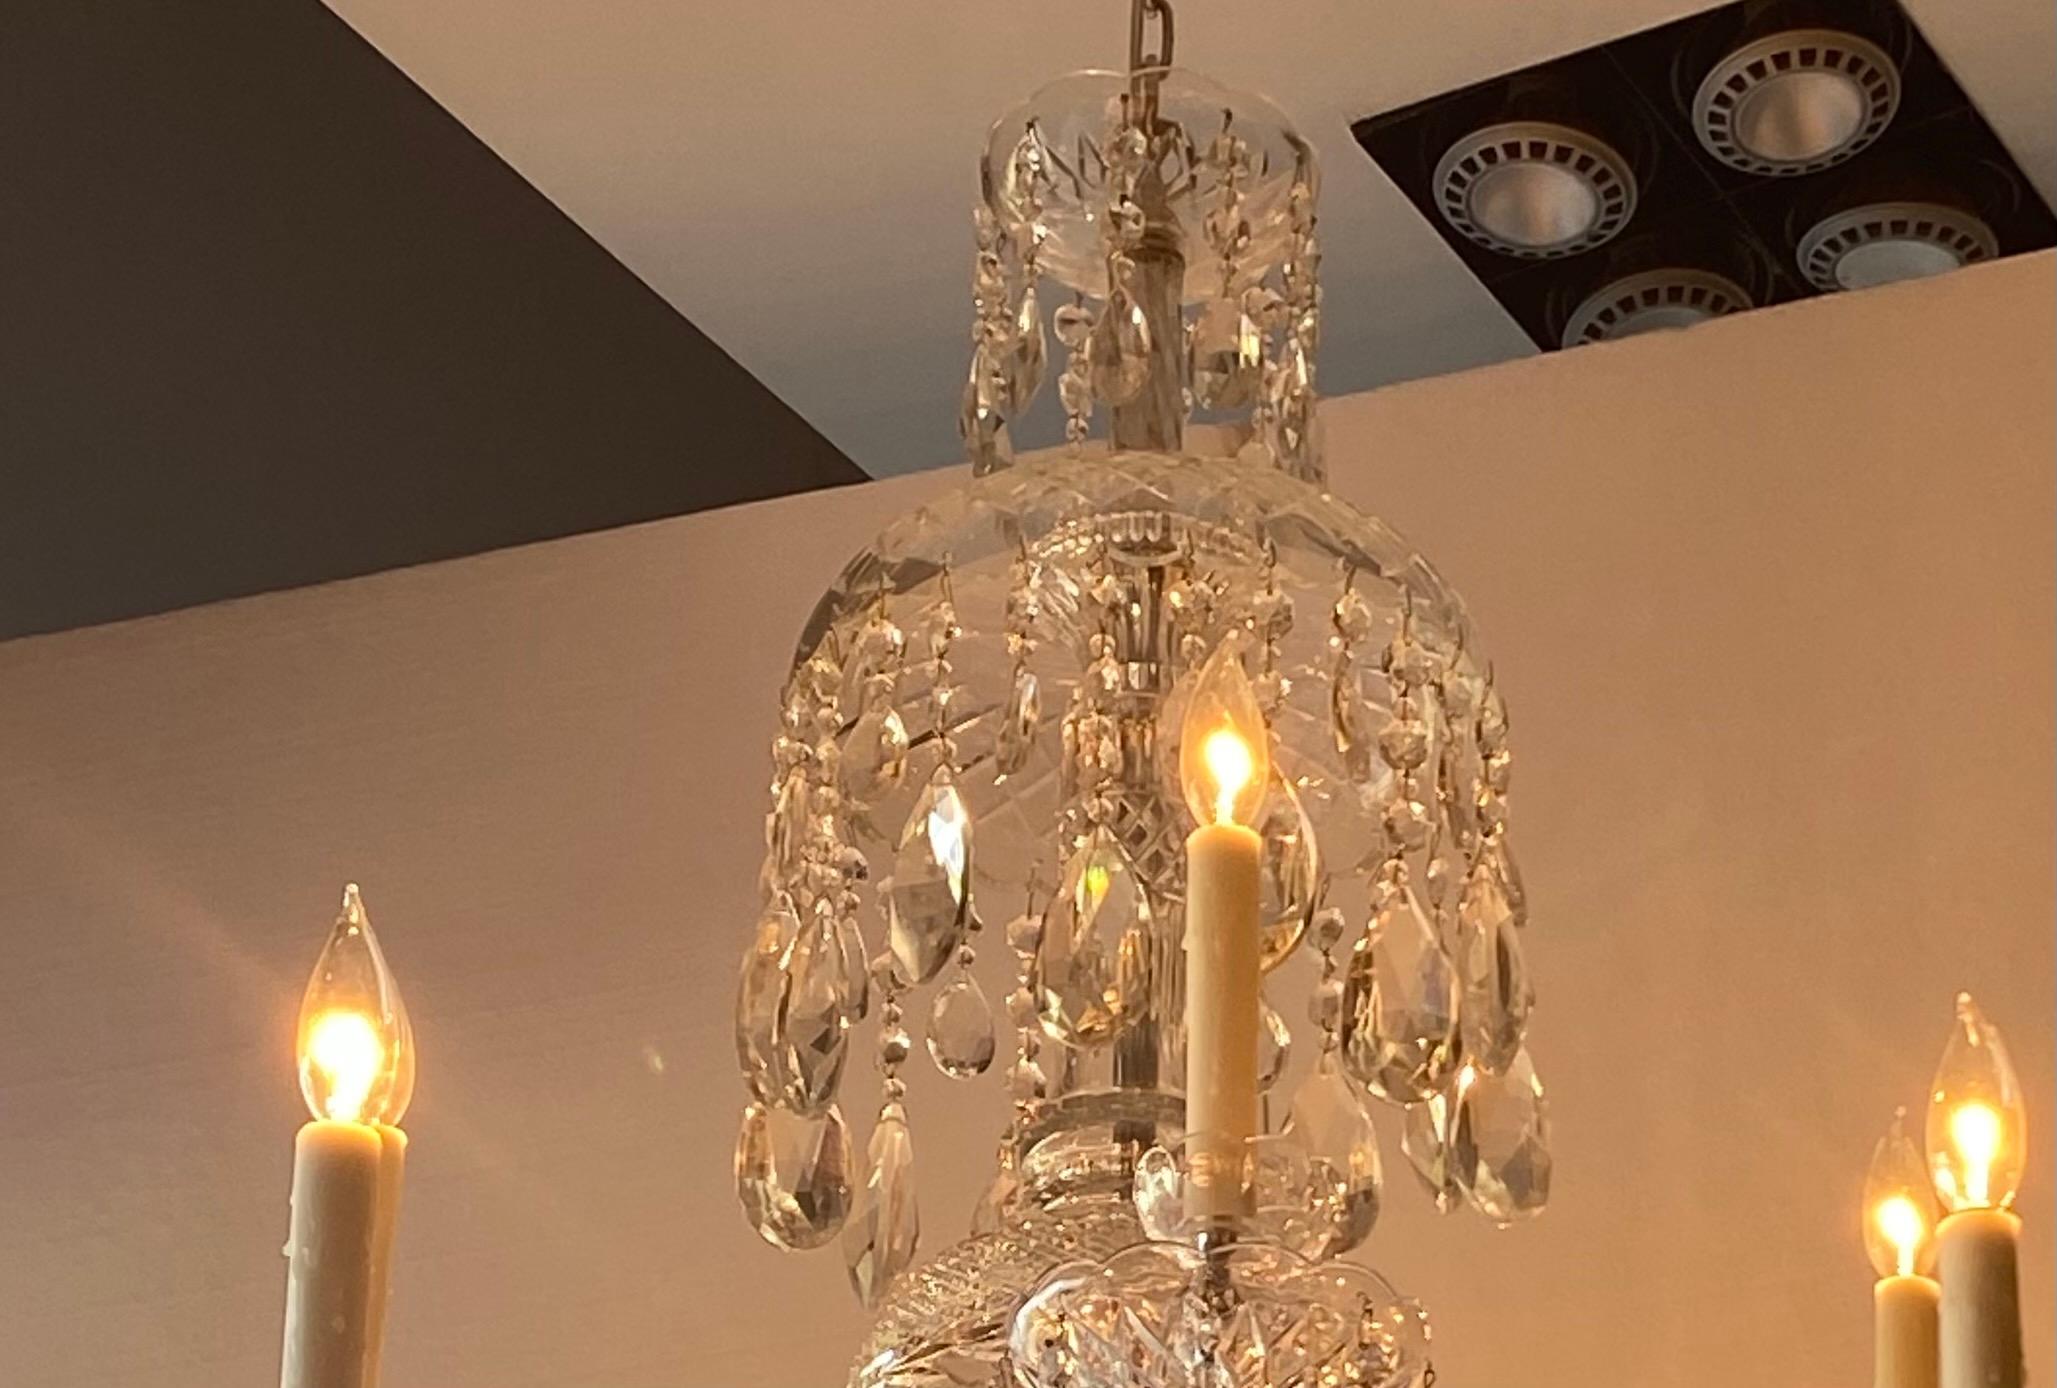 English Georgian chandelier, dressed with kite and half pear crystals. The central steam is cut German crystal.
12 lights chandelier with, 6 - 6